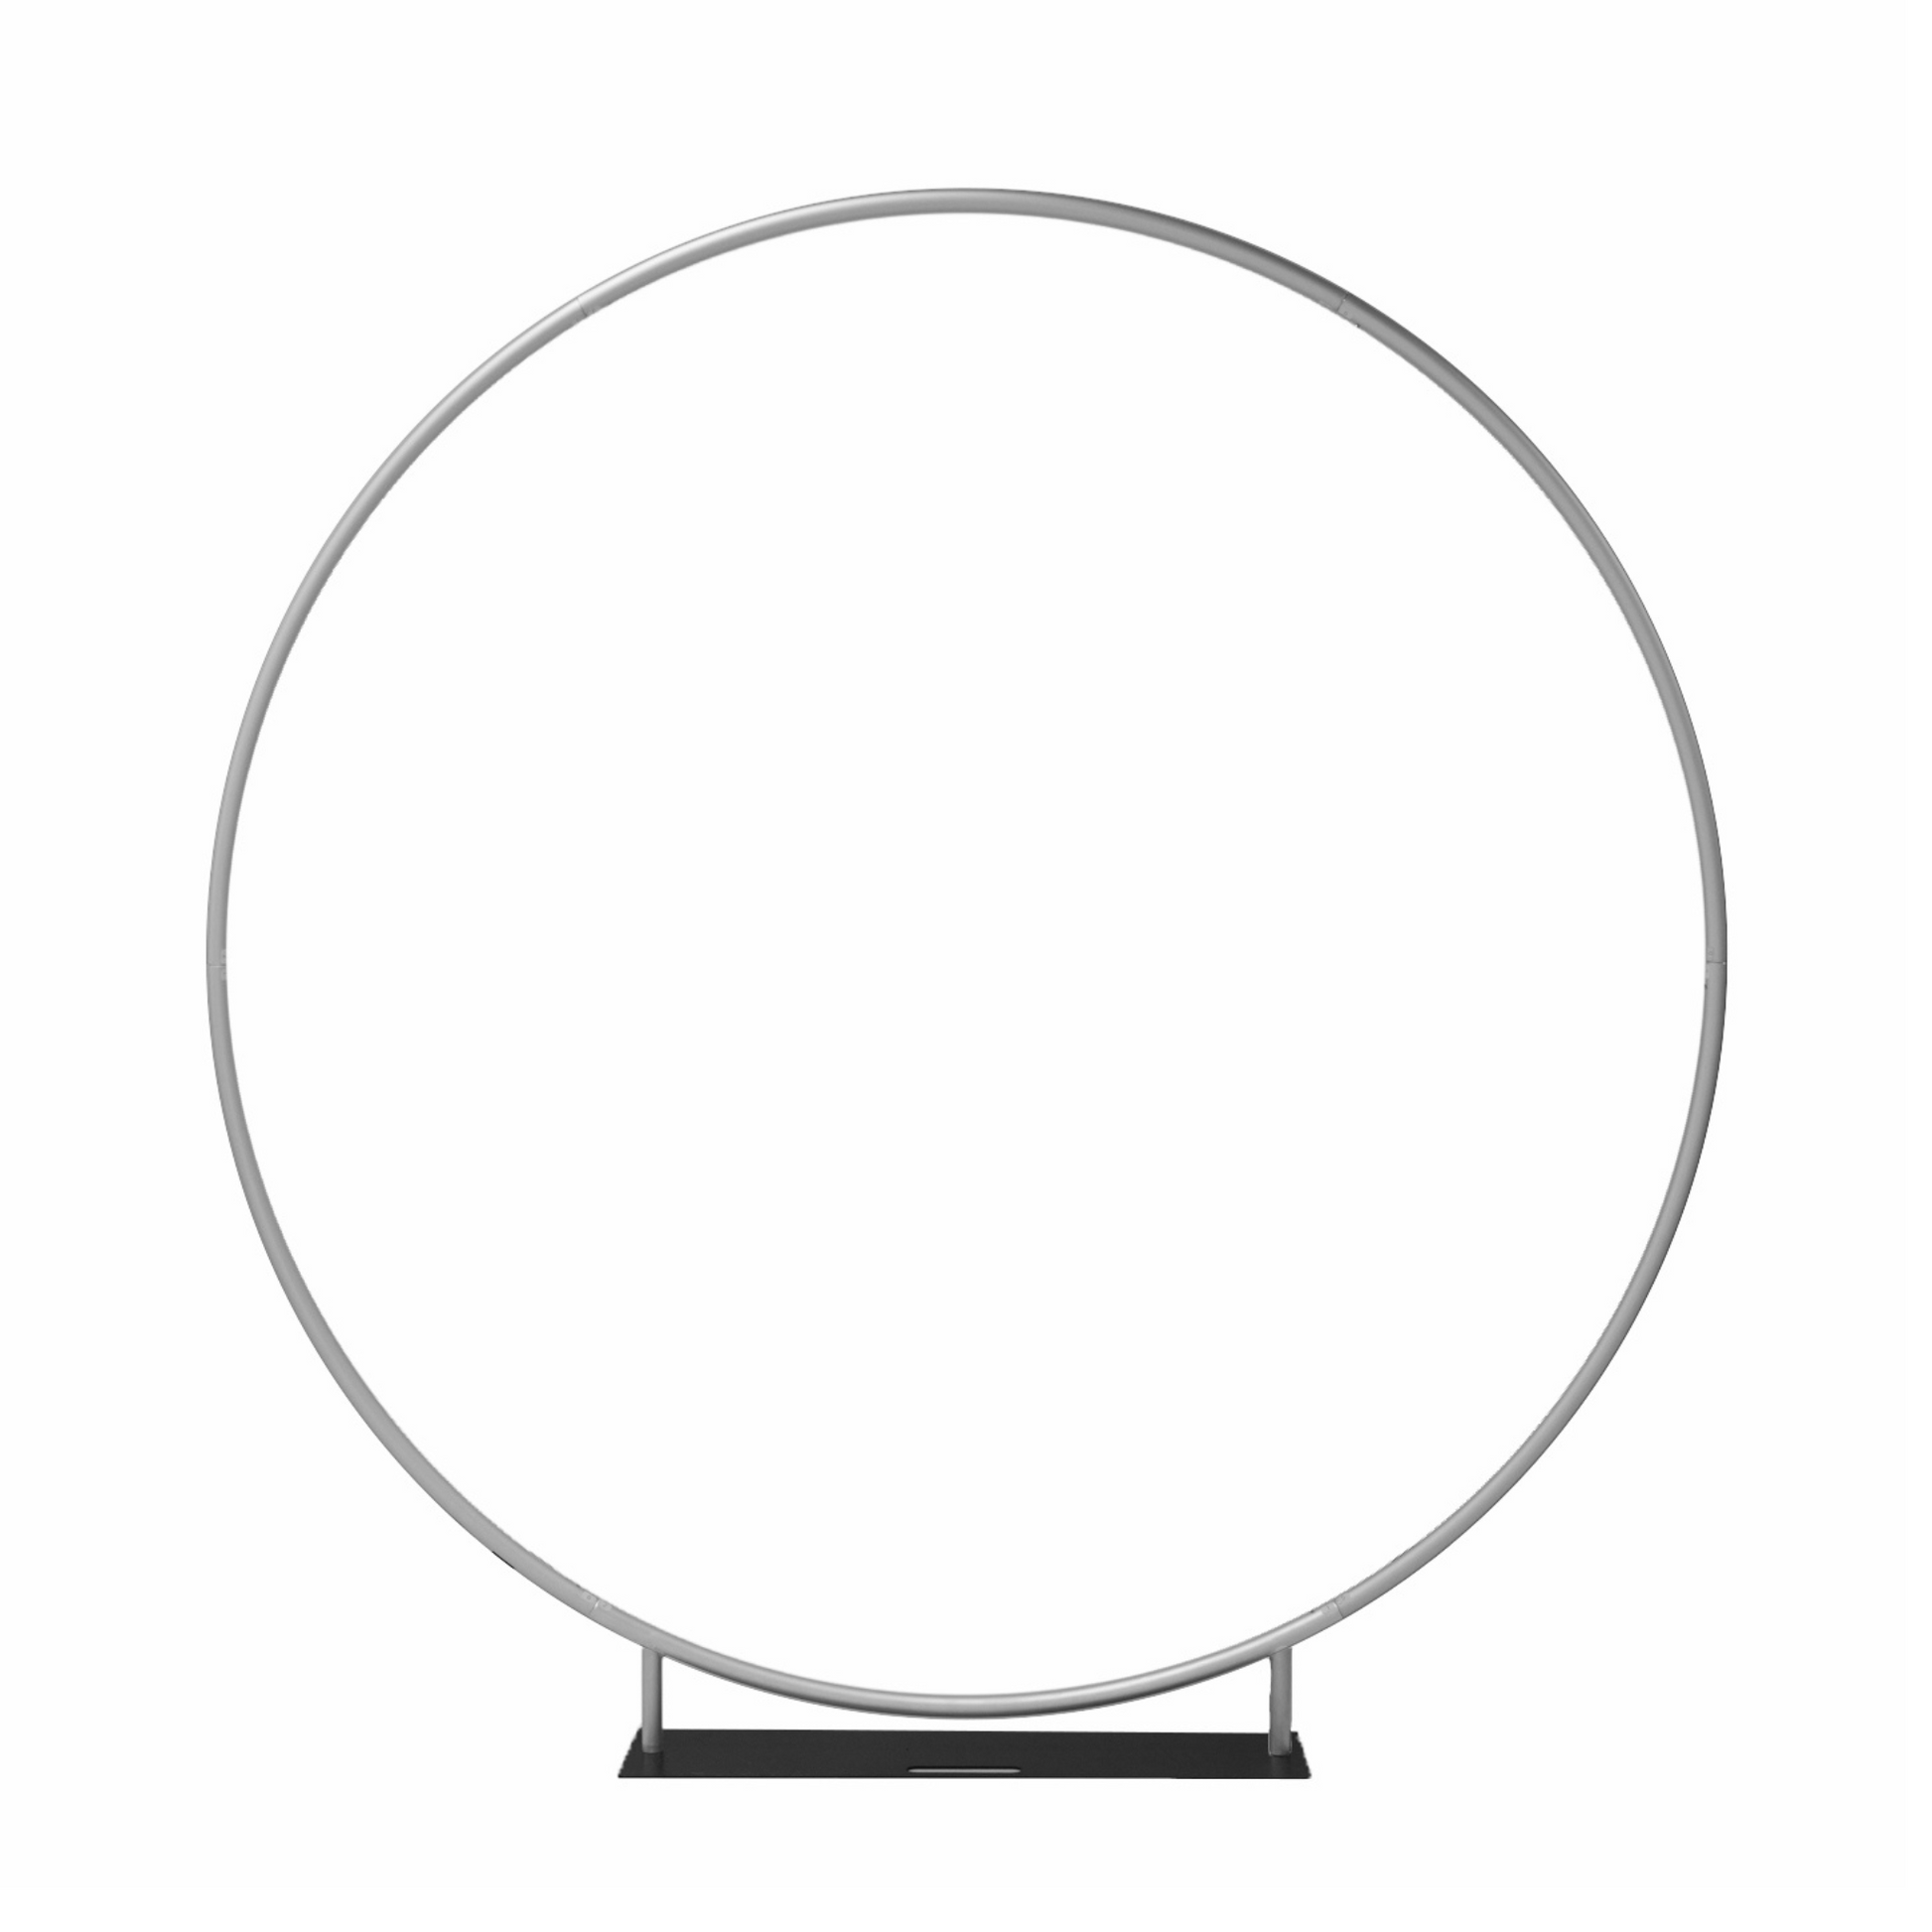 Heavy Duty 7ft Round Arch Backdrop Stand